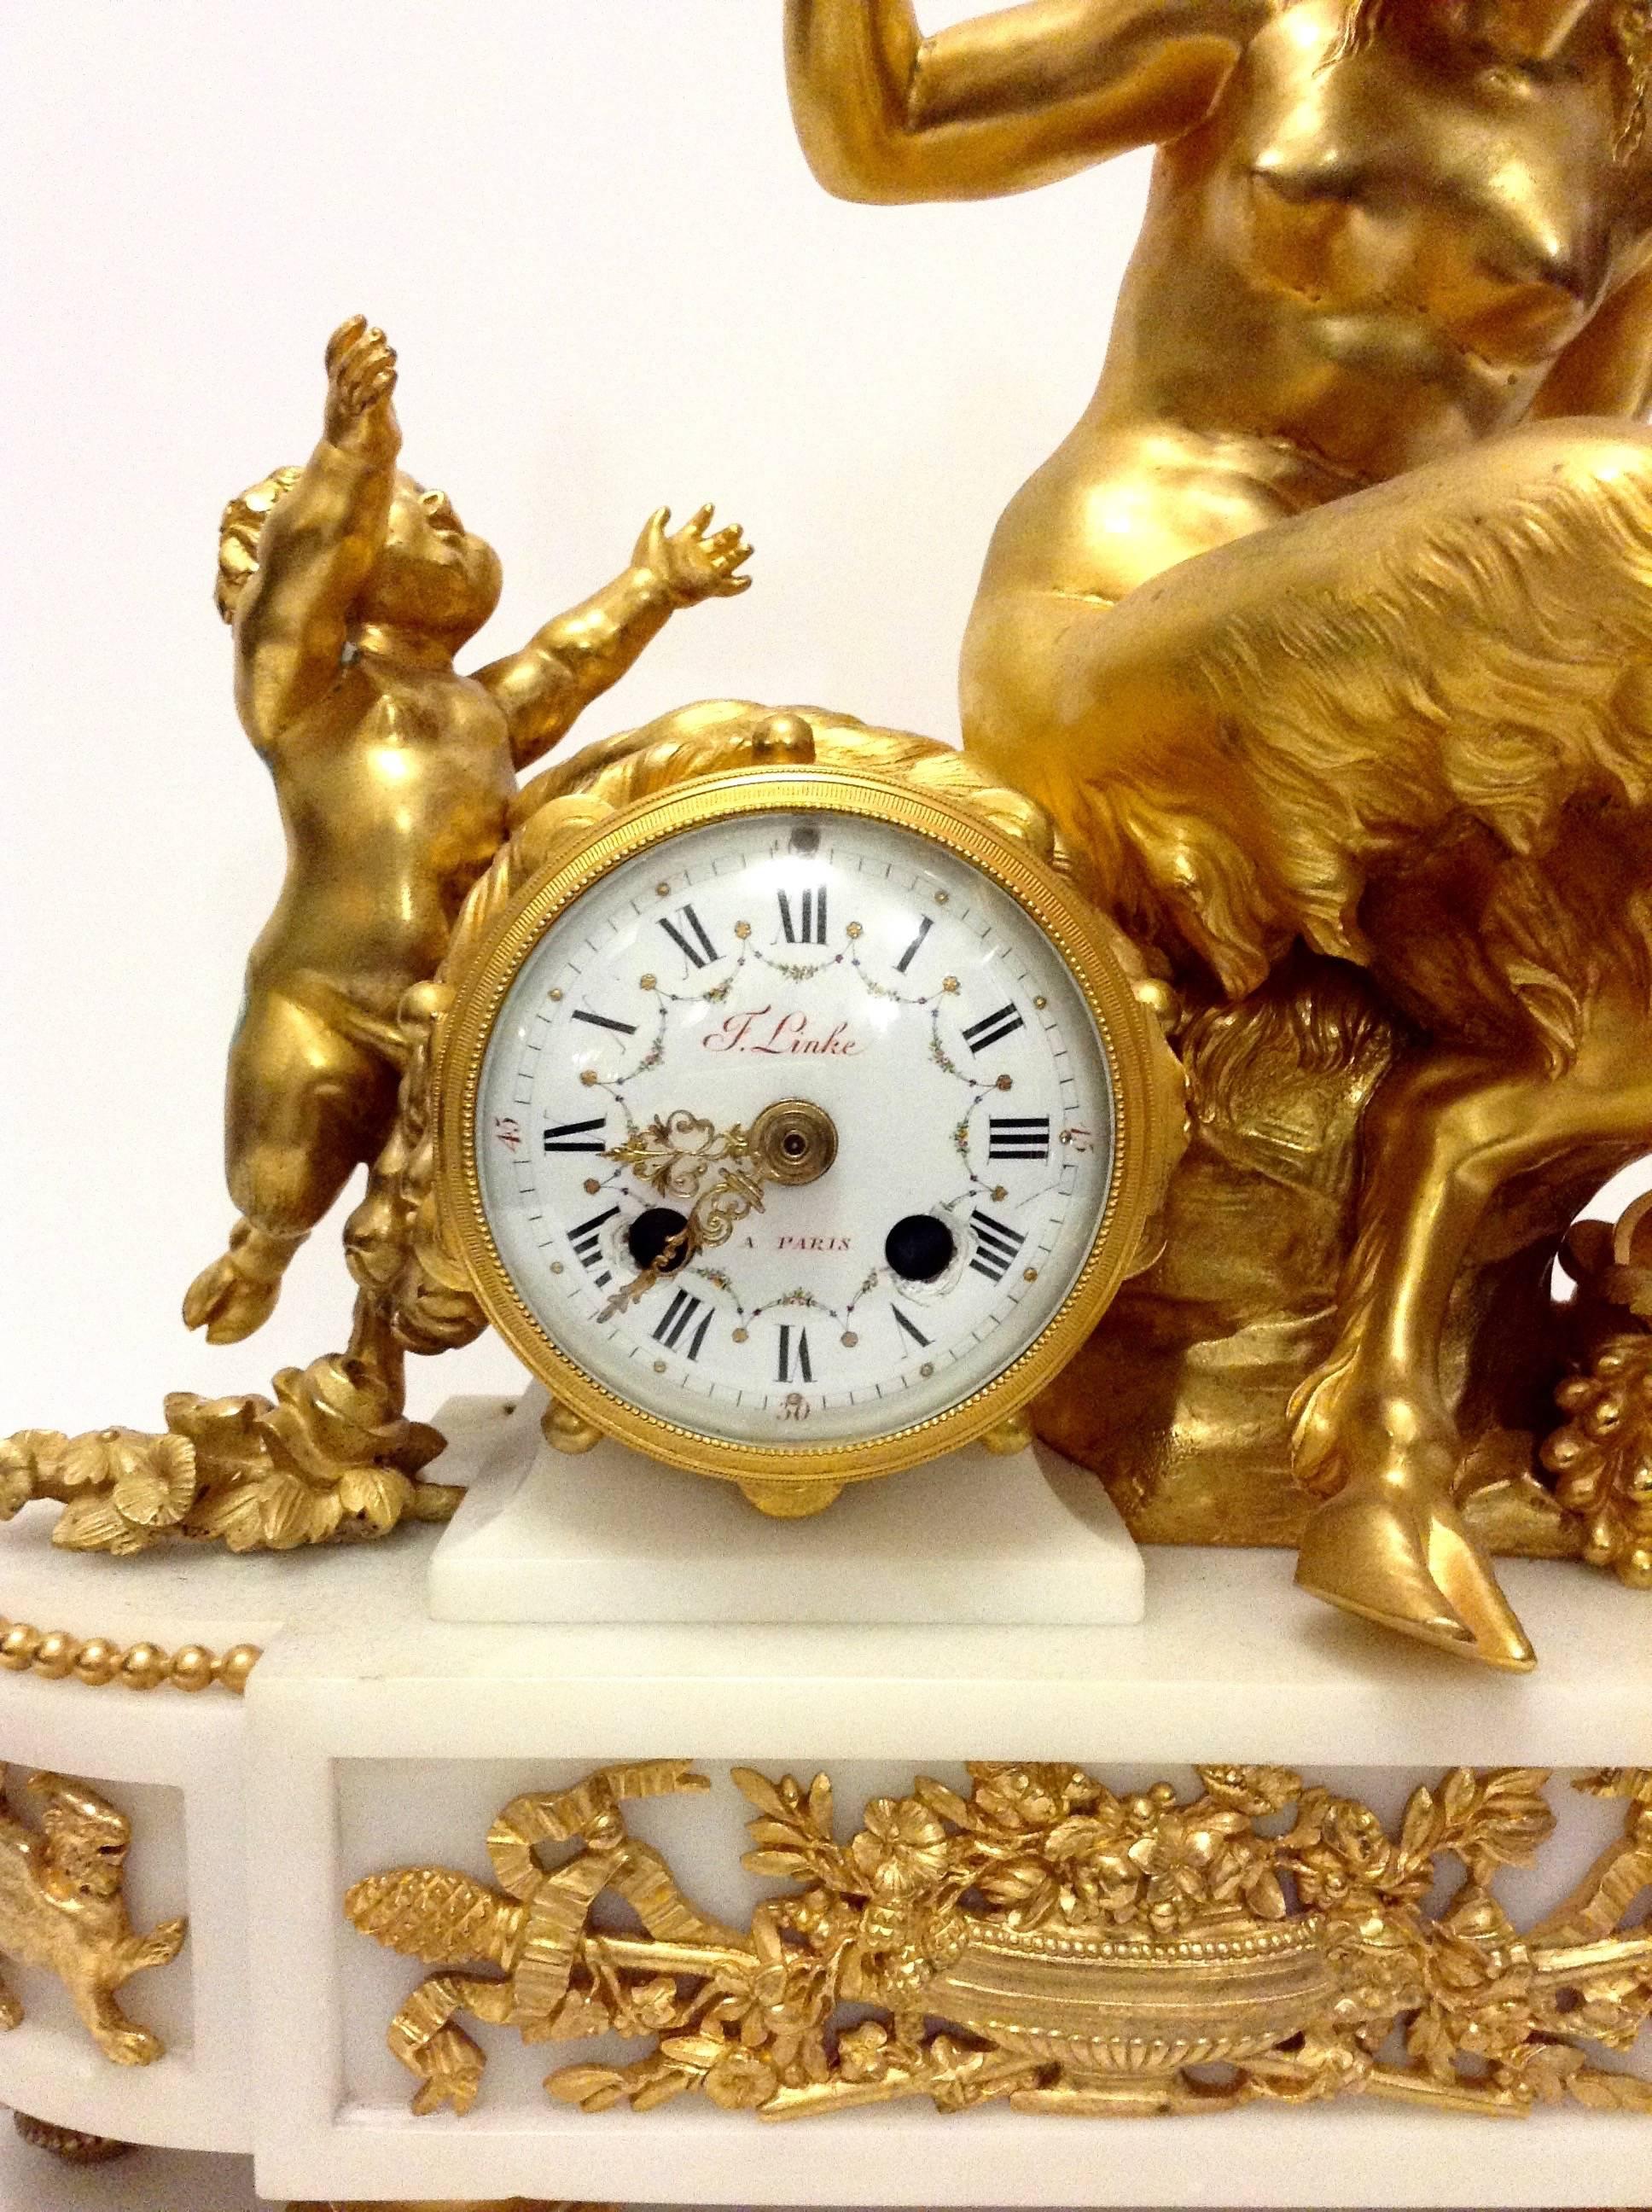 A François Linke clock made of gilt-bronze and white marble. This clock is an interesting piece as it is cast after a work by the famous French sculptor Clodion, also known as Claude Michel (1734-1814), who was known for his work in the Rococo